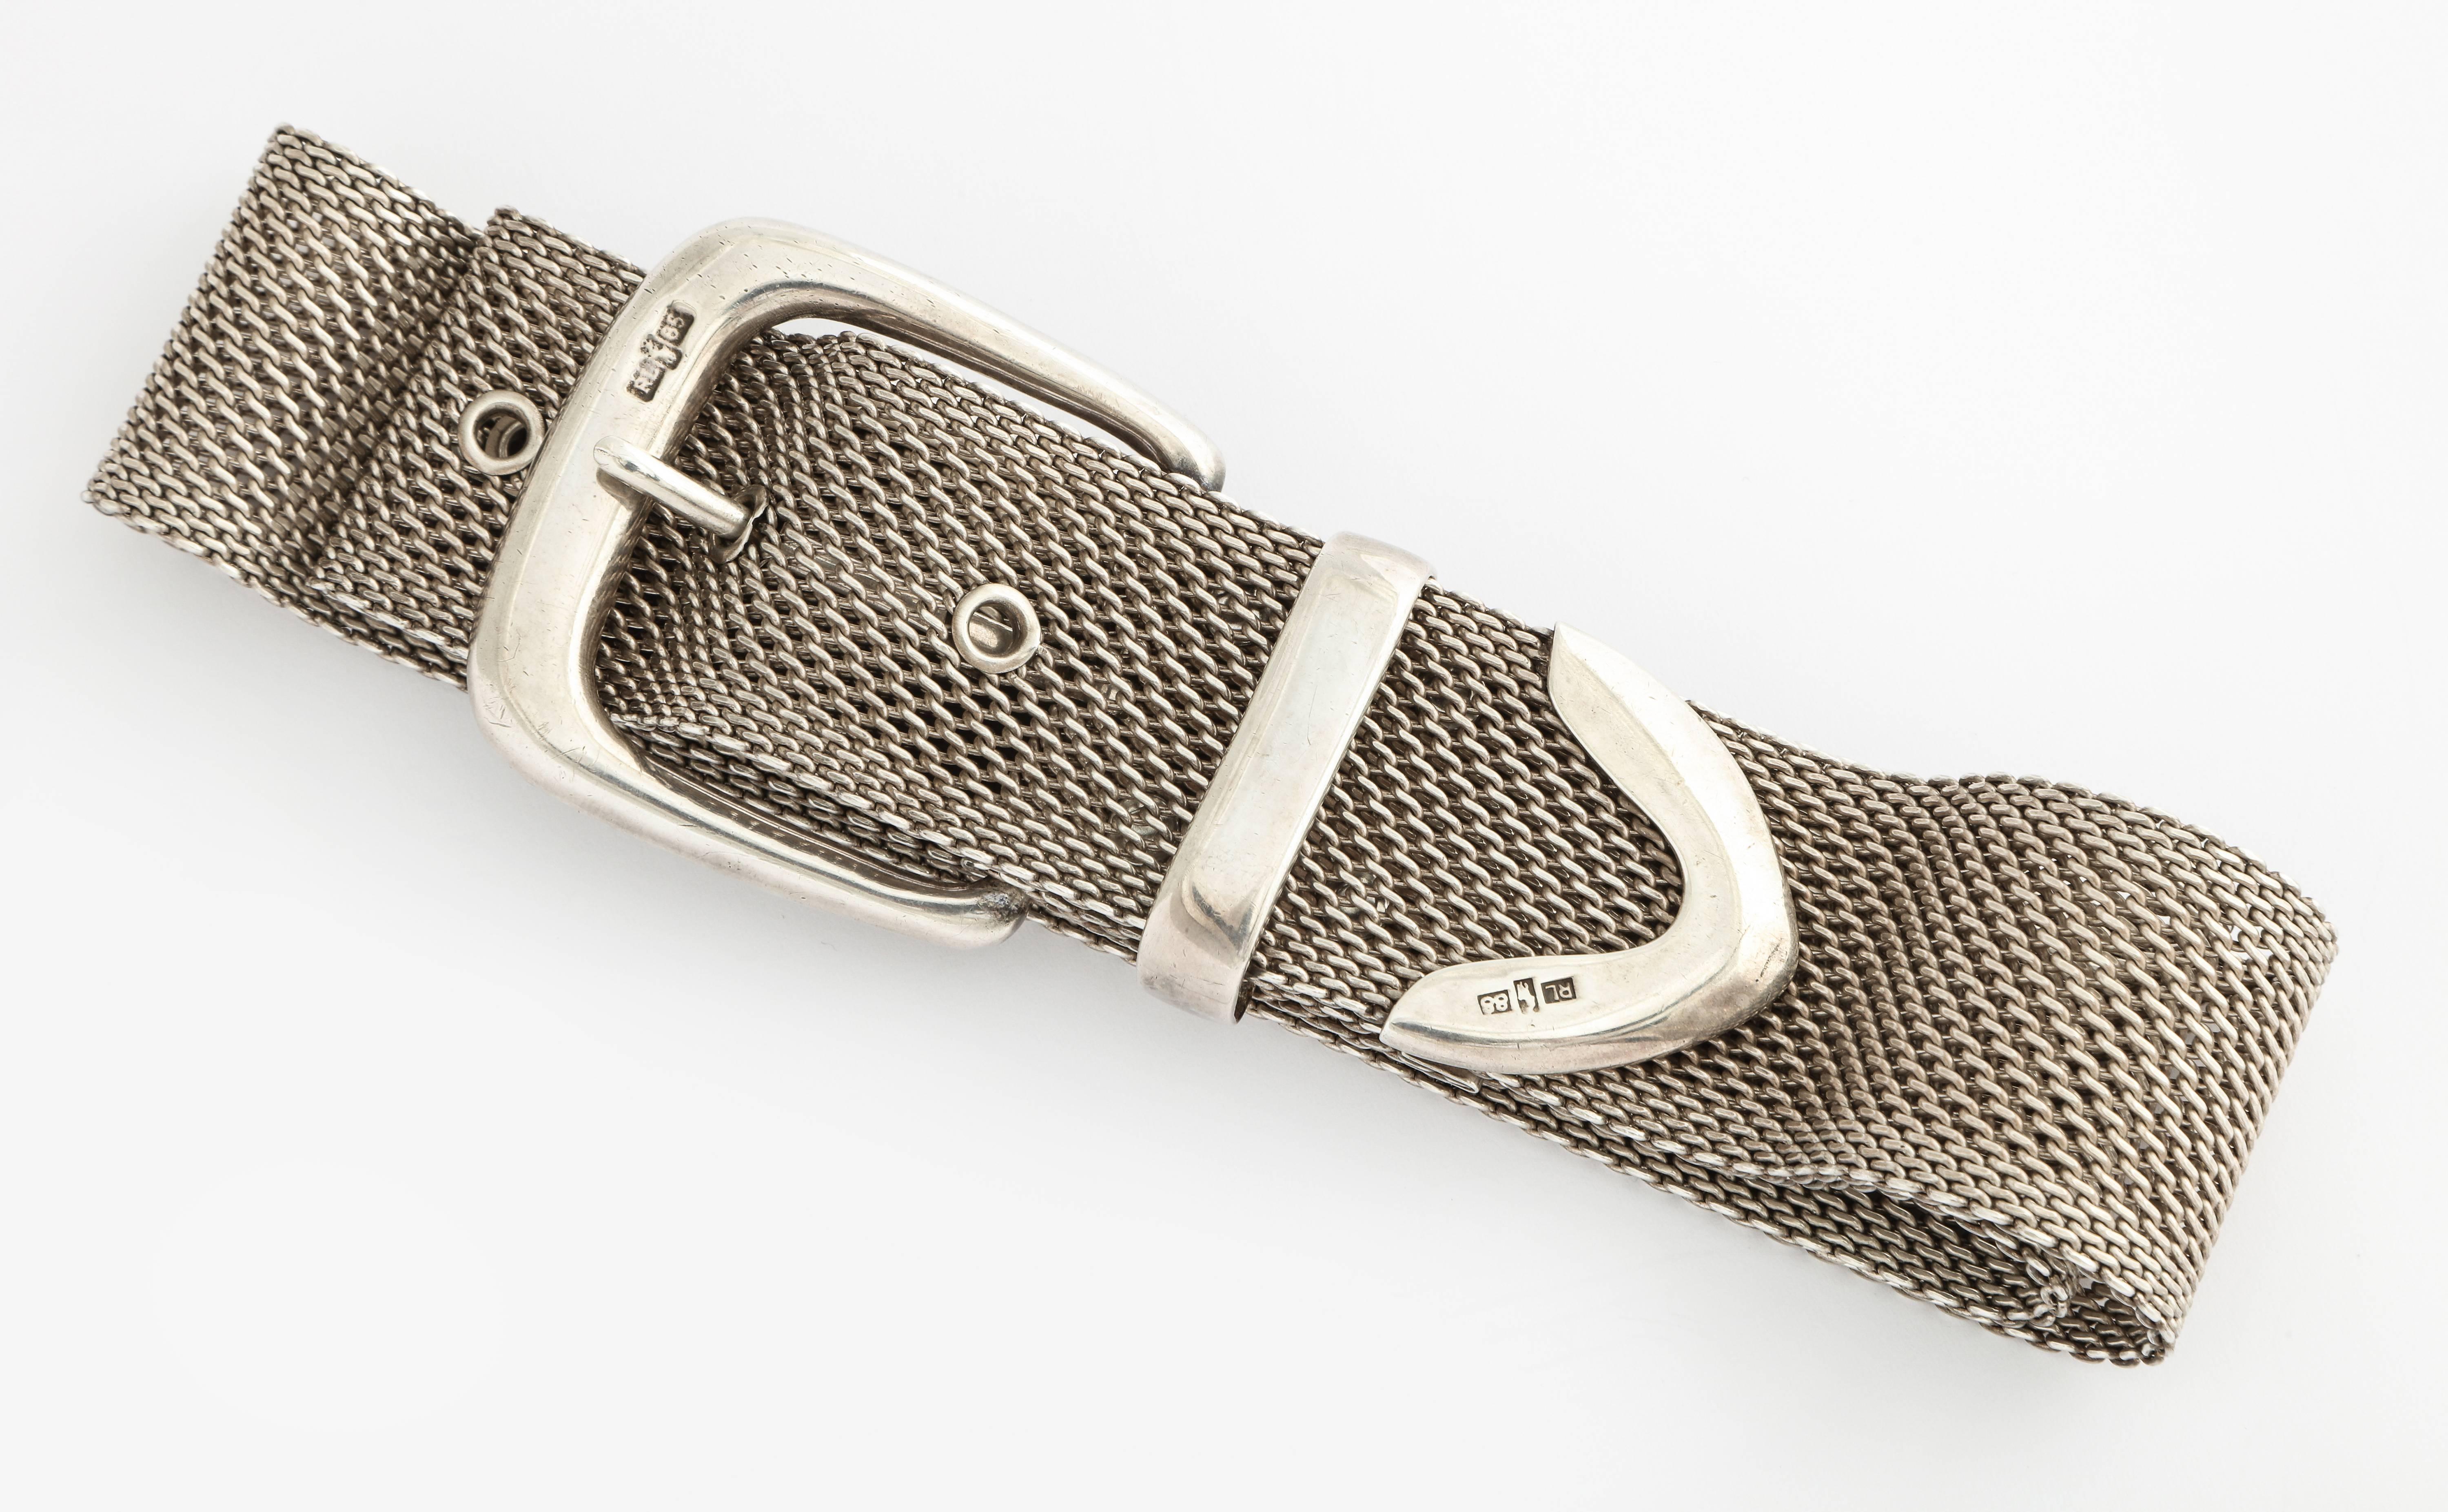 This chic and modern looking 1980s Ralph Lauren sterling silver mesh belt will work for jeans, tunic top, or dress. Total length of 33 inches, and fits a 28 inch waist; mesh width 1 1/4 inches. Signed on buckle and tip; sterling silver marks.